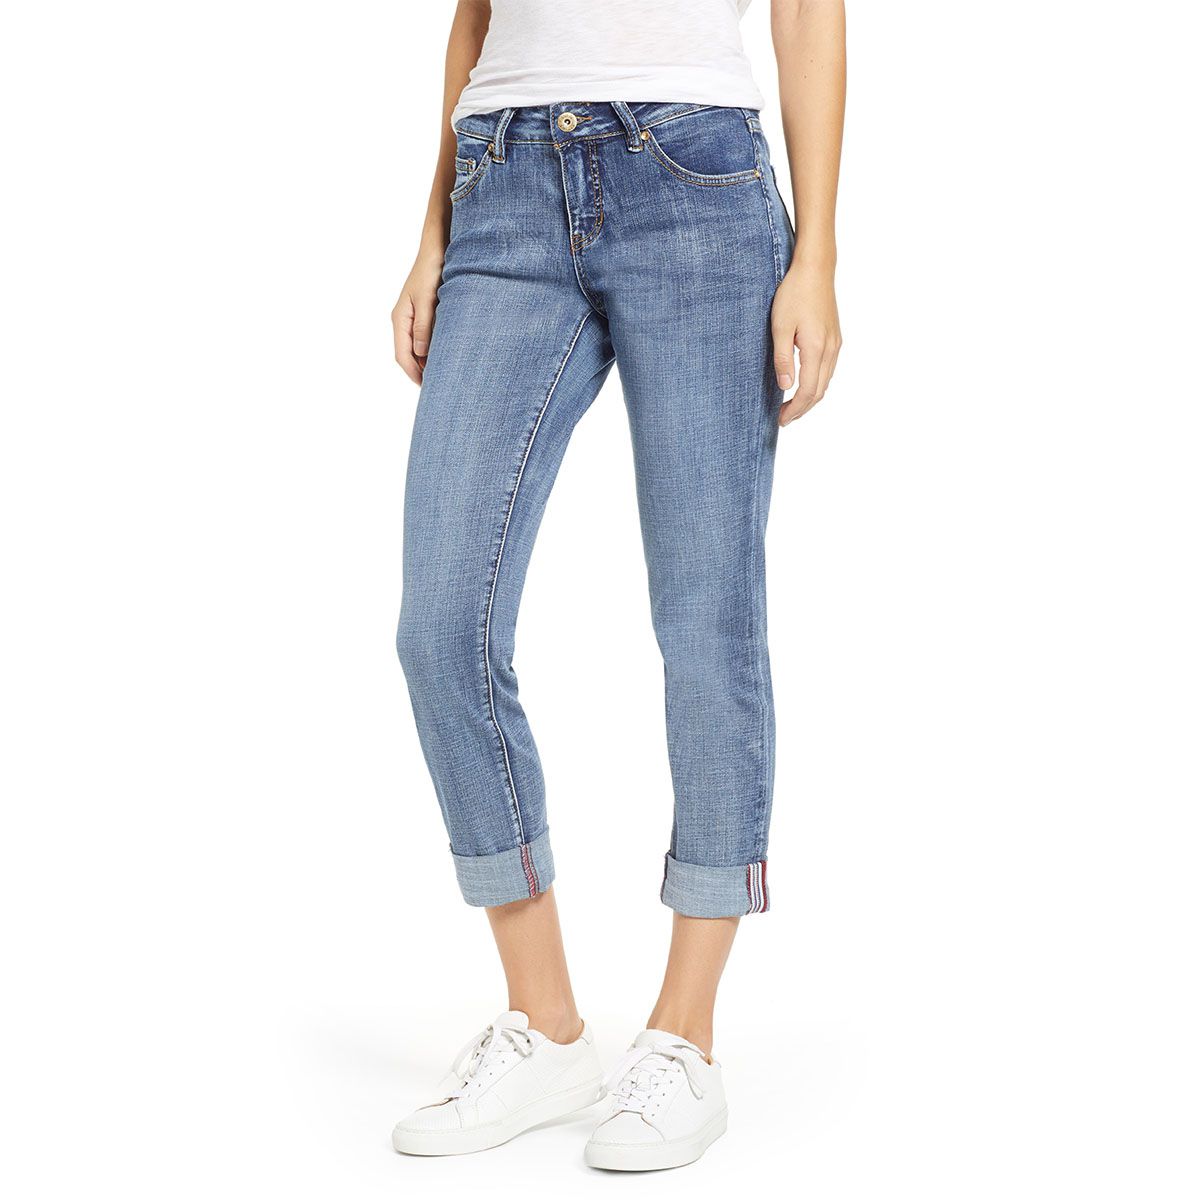 11 Best Jeans for Petite Women: Topshop, NYDJ, Paige, and More | InStyle